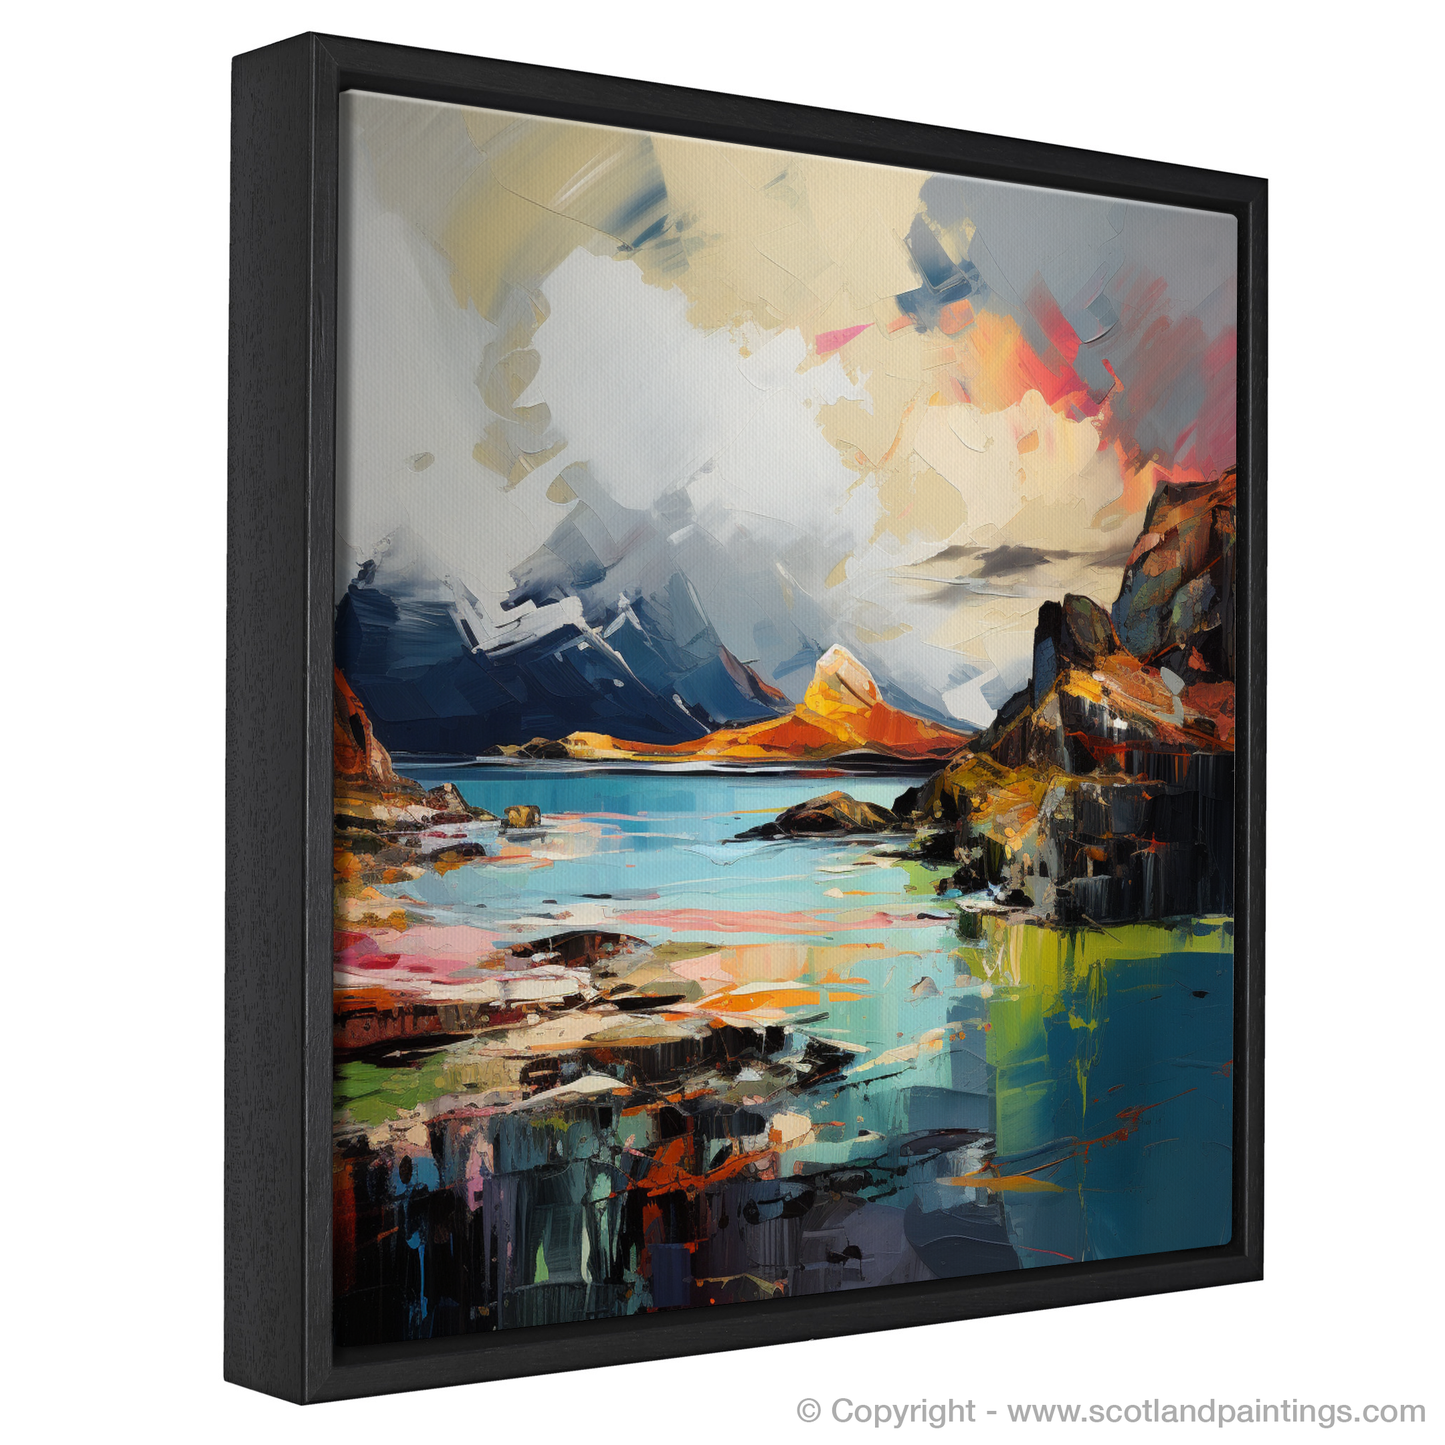 Painting and Art Print of Isle of Skye's smaller isles, Inner Hebrides entitled "Isle of Skye's Wild Isle Expression".